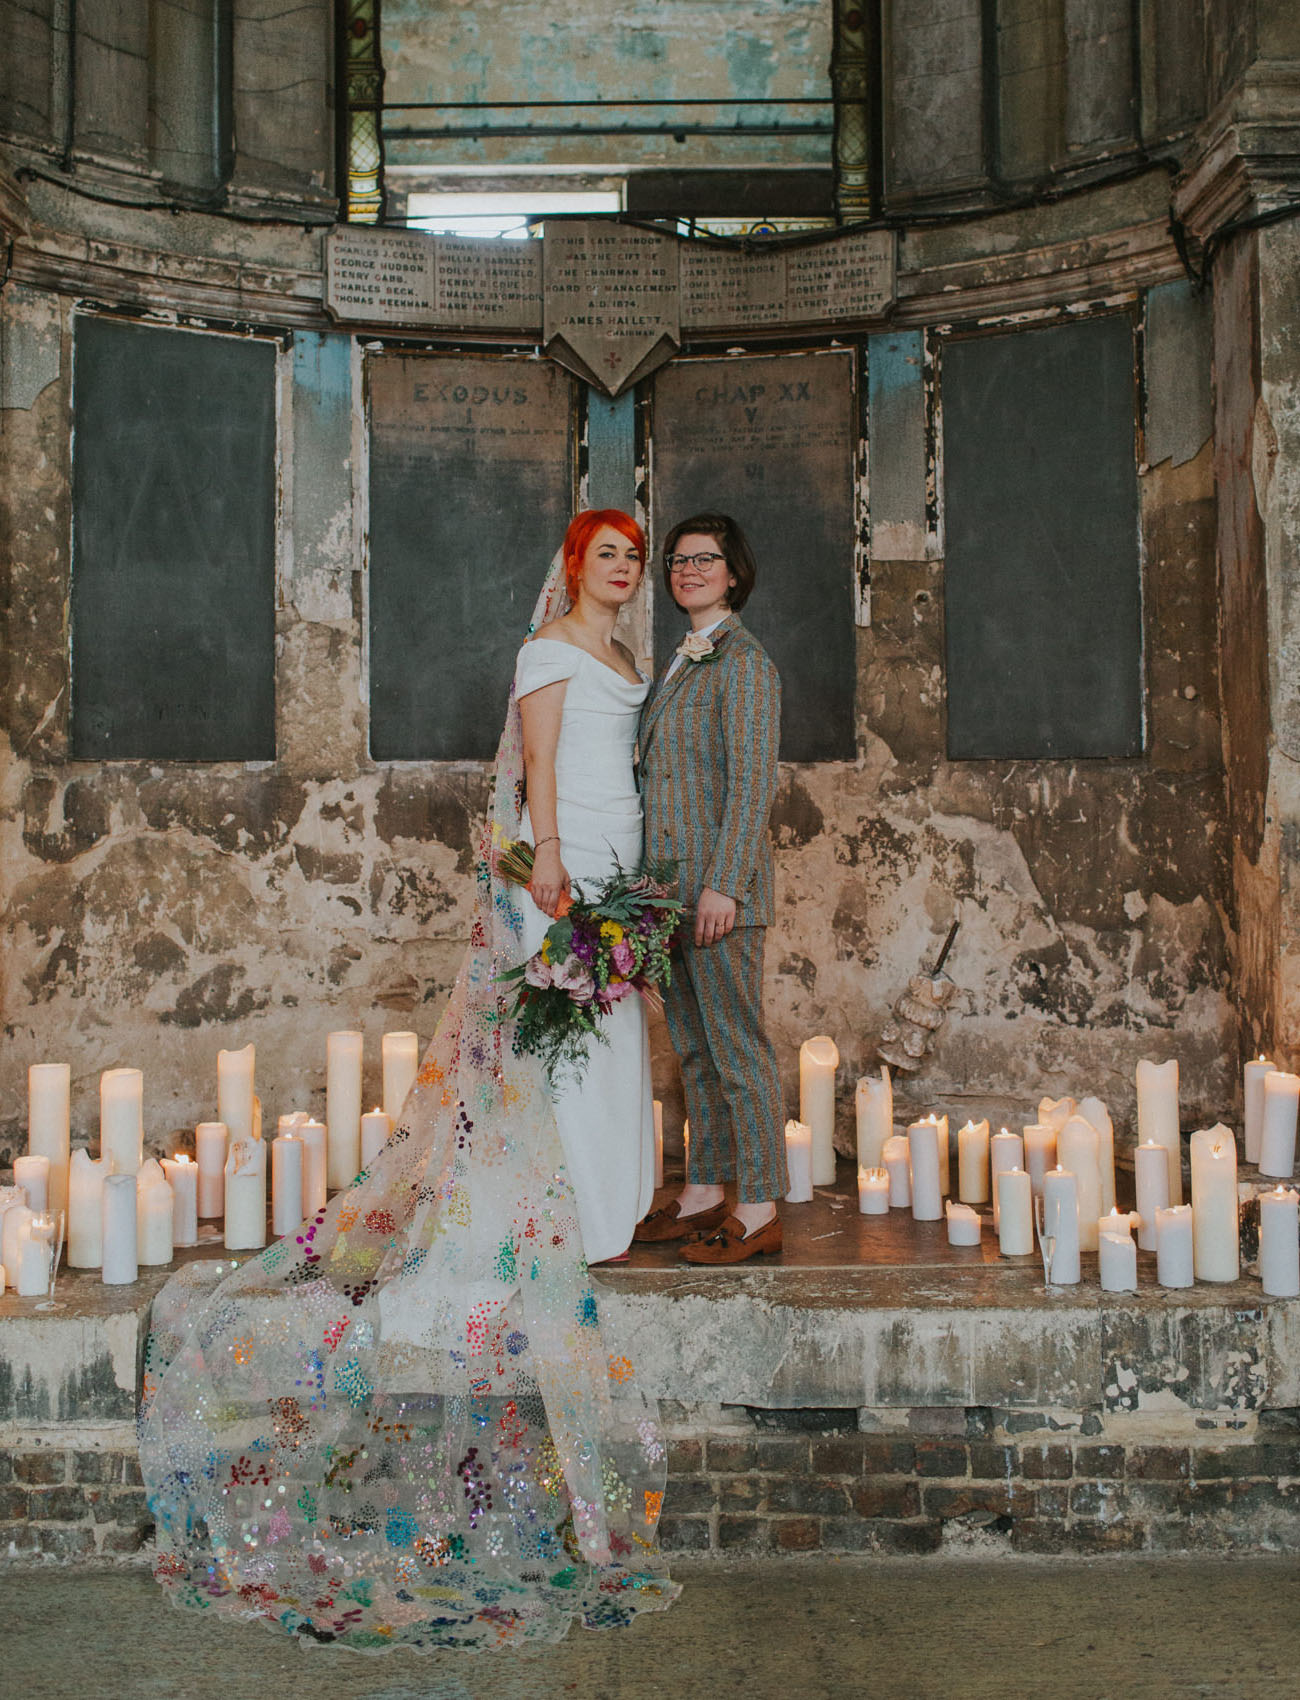 This colorful and fun wedding in London was filled with DIYs for personalization and the brides were wearing creative outfits